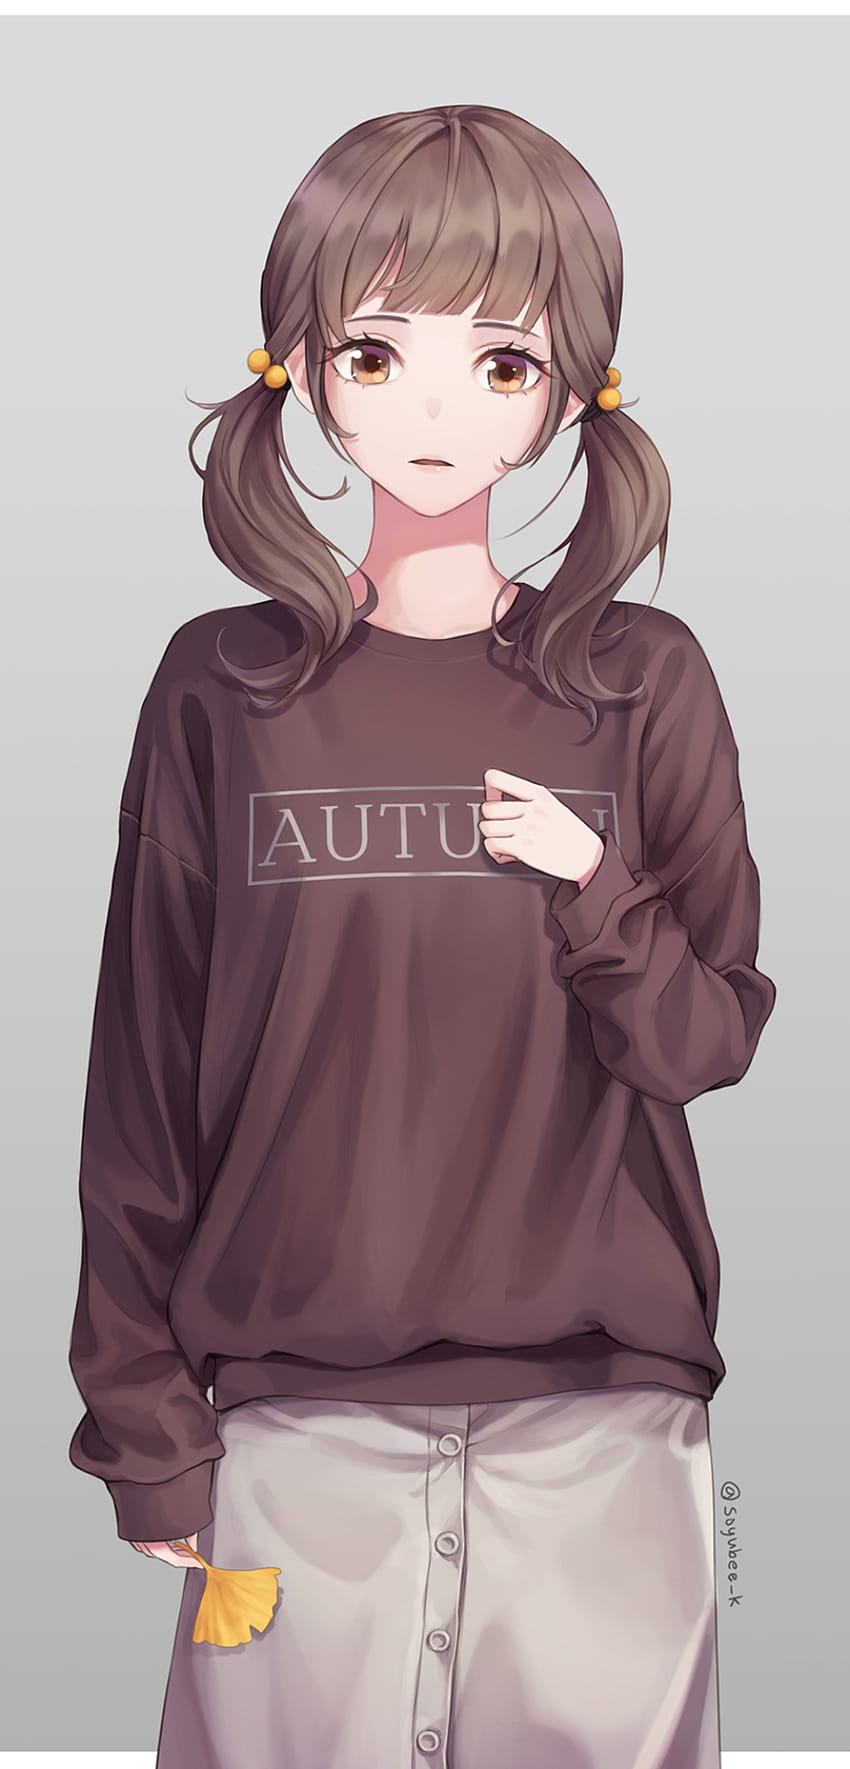 Cute anime girl wearing casual outfit